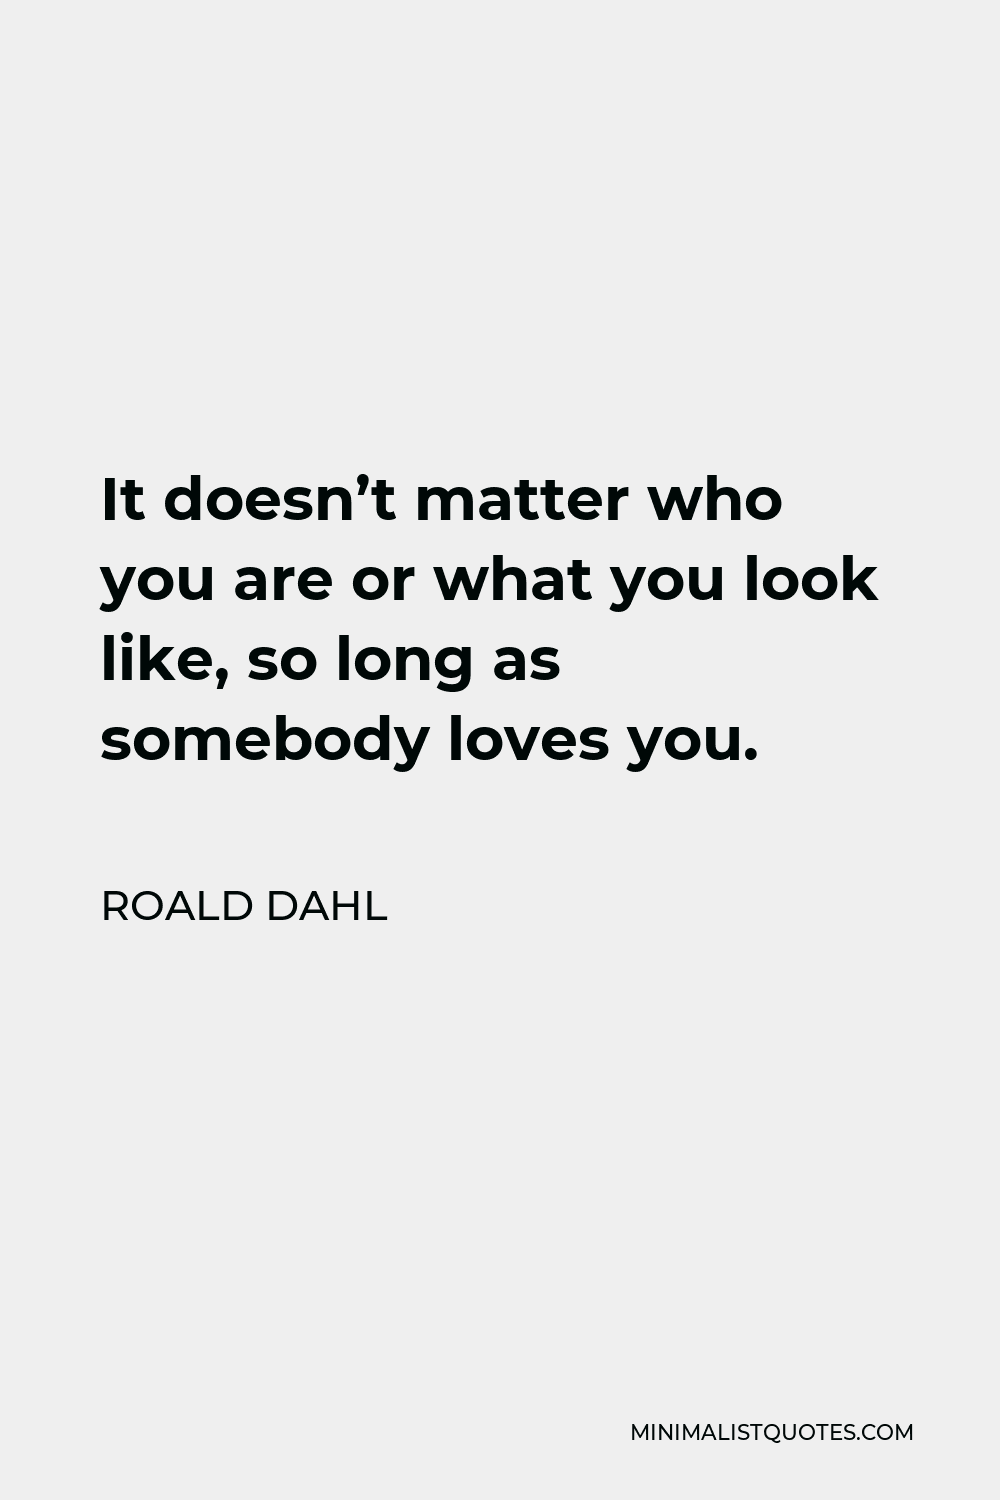 Roald Dahl Quote - It doesn’t matter who you are or what you look like, so long as somebody loves you.